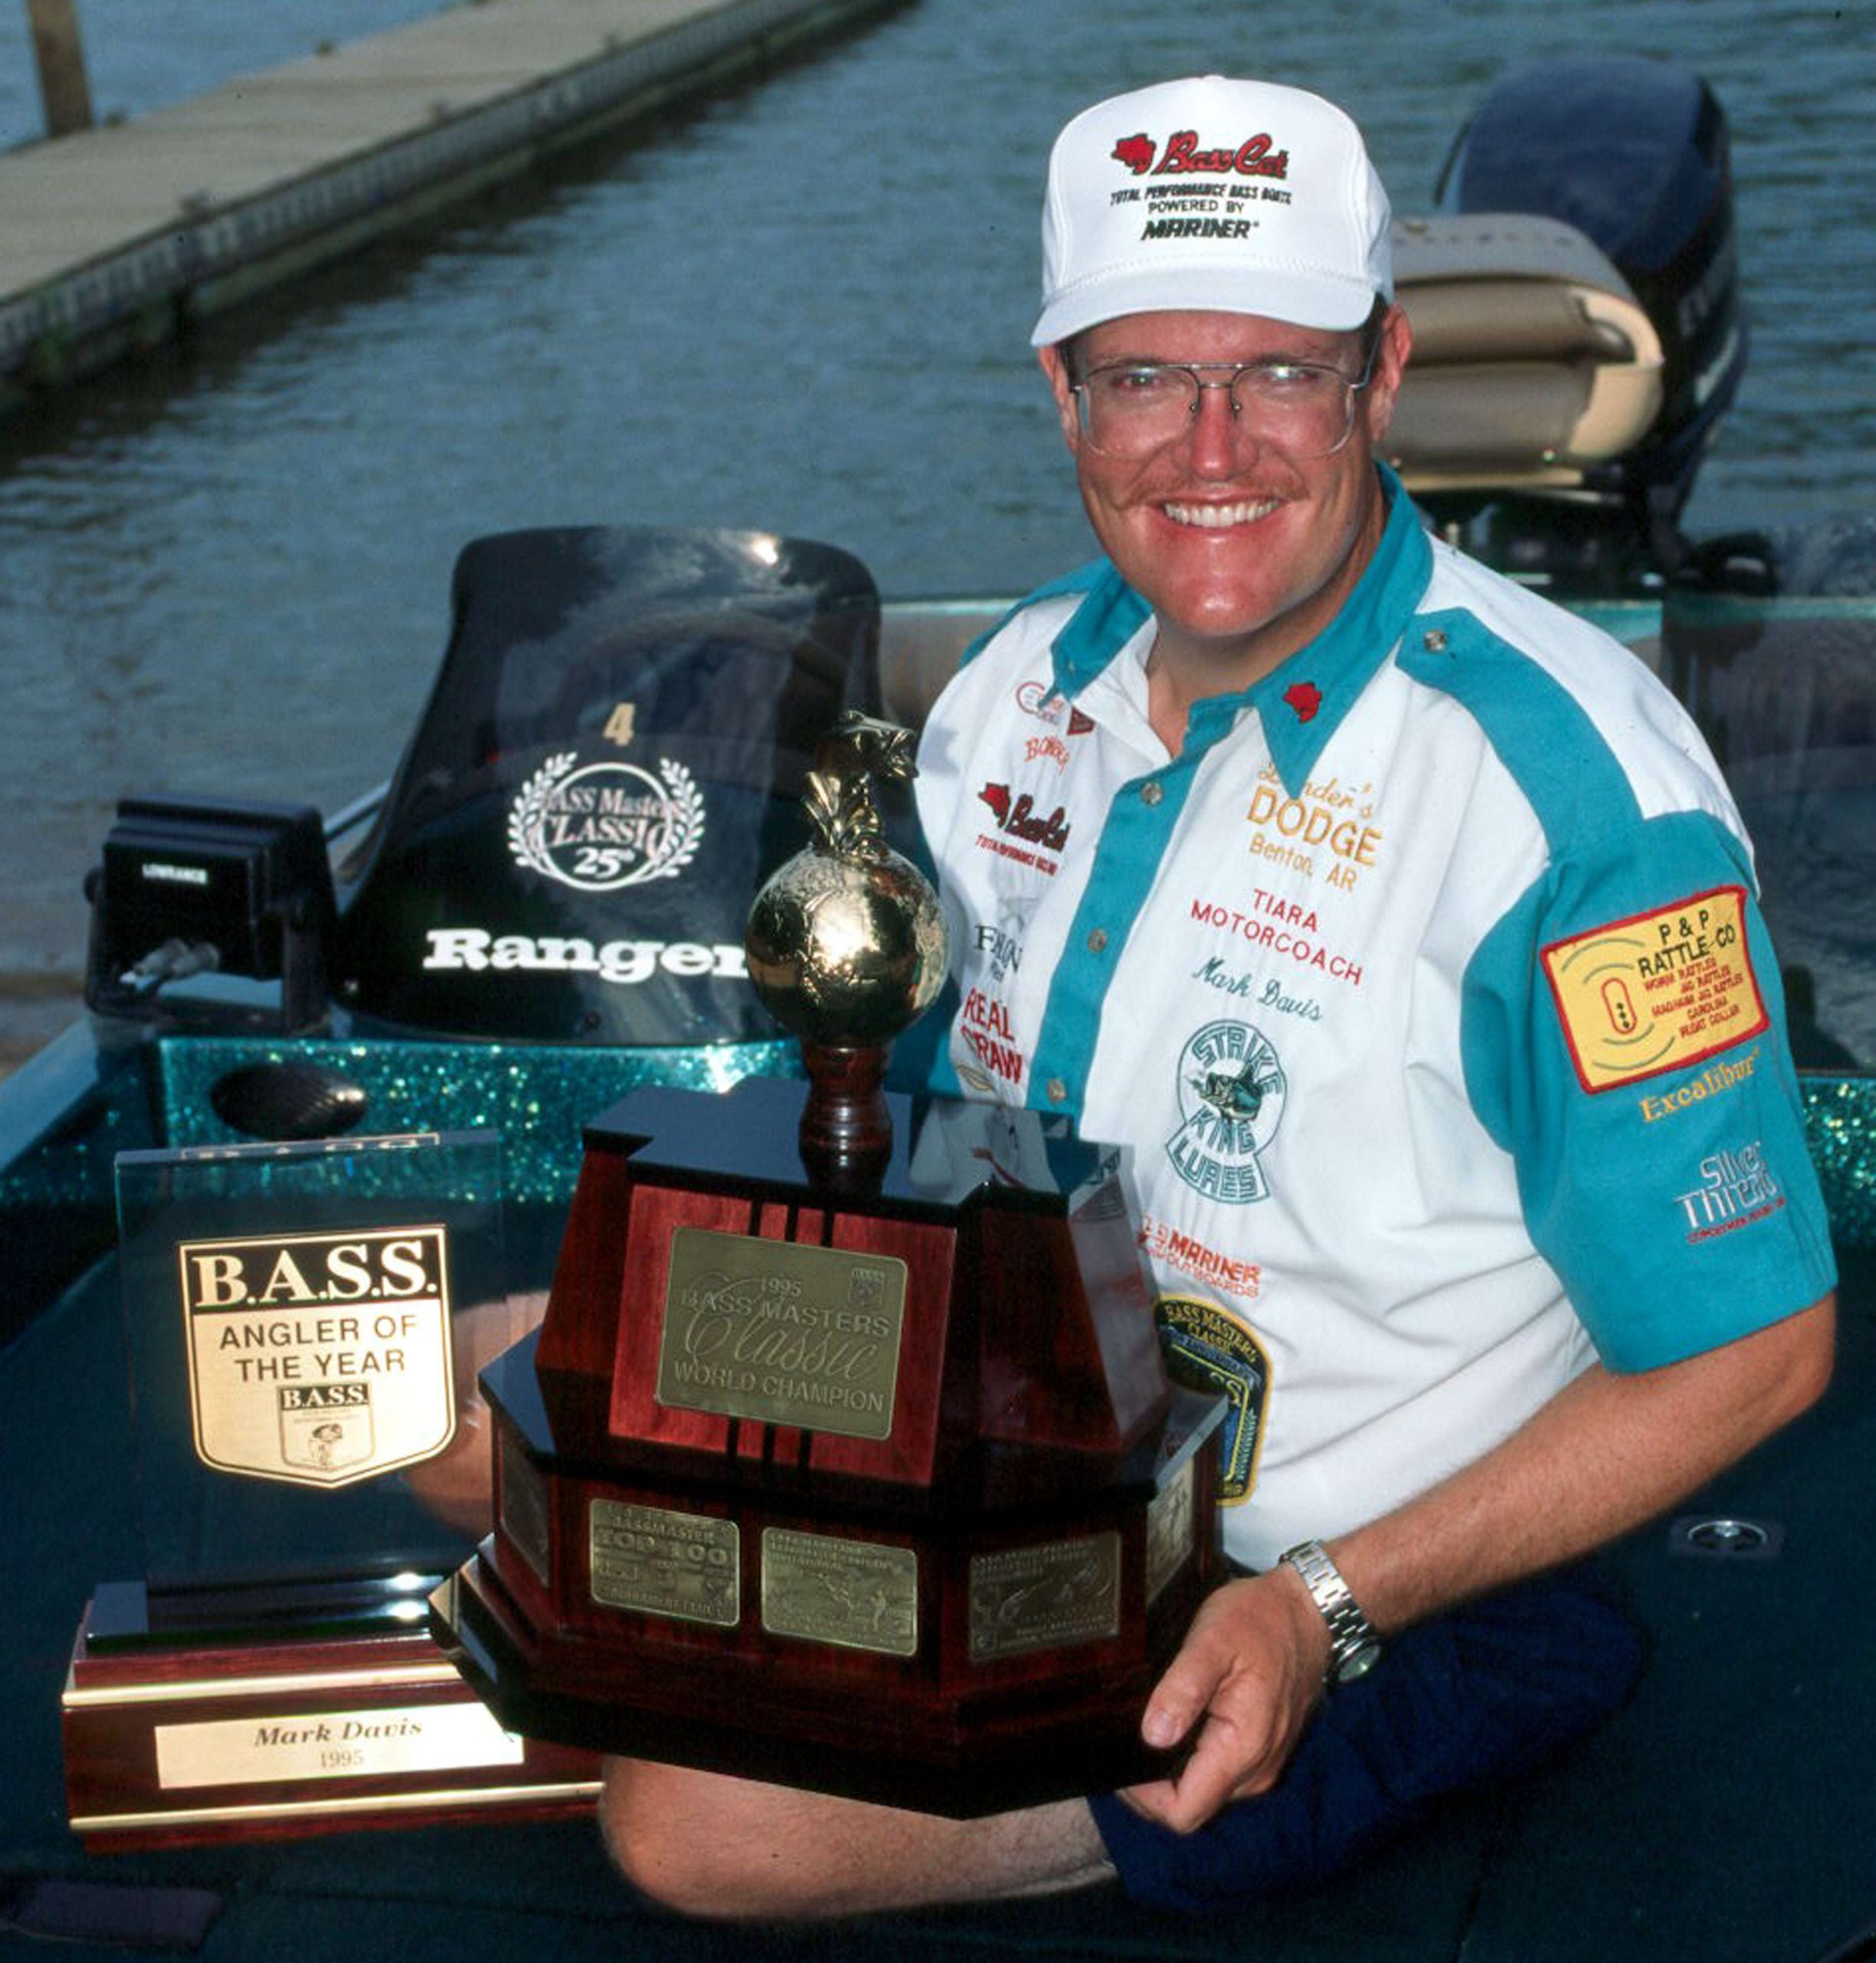 In 1995, Mark Davis won both the Bassmaster Angler of the Year title and the Bassmaster Classic championship. He added Angler of the Year titles in 1998 and 2001. The 51-year-old resident of Mount Ida, Ark., always gives a thoughtful answer to any question. Davis might surprise you with some of his answers to these 20 questions.